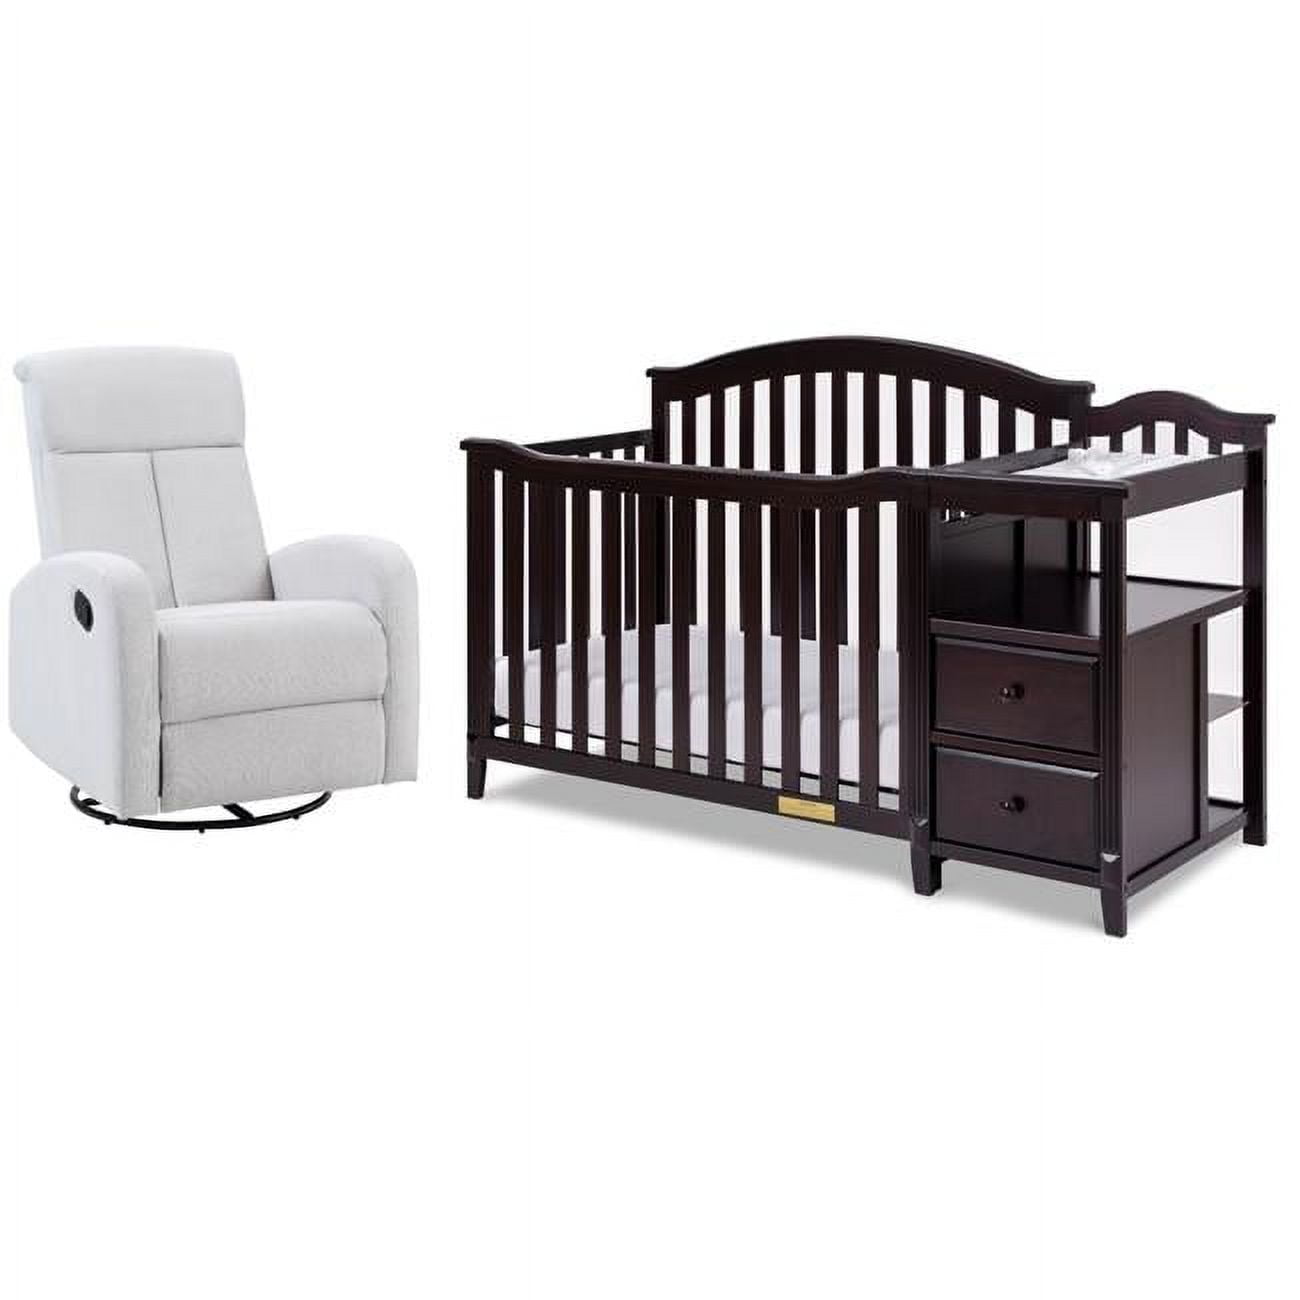 4566E-GR719G 46 x 73 x 30 in. Kali 4-in-1 Convertible Crib & Changer with Amber Swivel Glider Recliner, Espresso & Gray -  AFG Baby Furniture, 4566E+GR719G